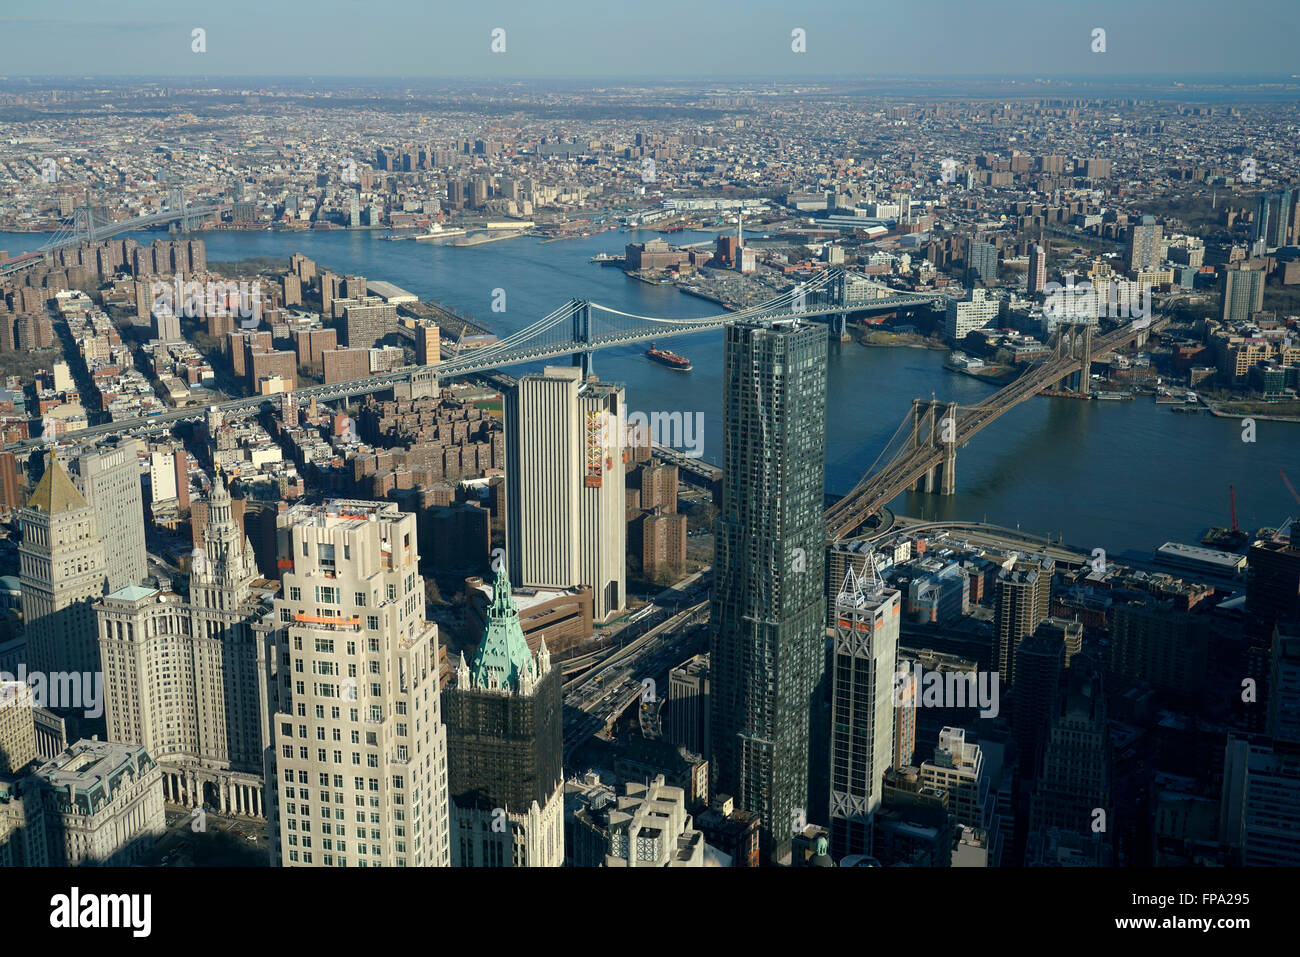 Aerial view of Lower Manhattan with Manhattan Bridge and Brooklyn Bridge over East River and borough of Brooklyn in background Stock Photo